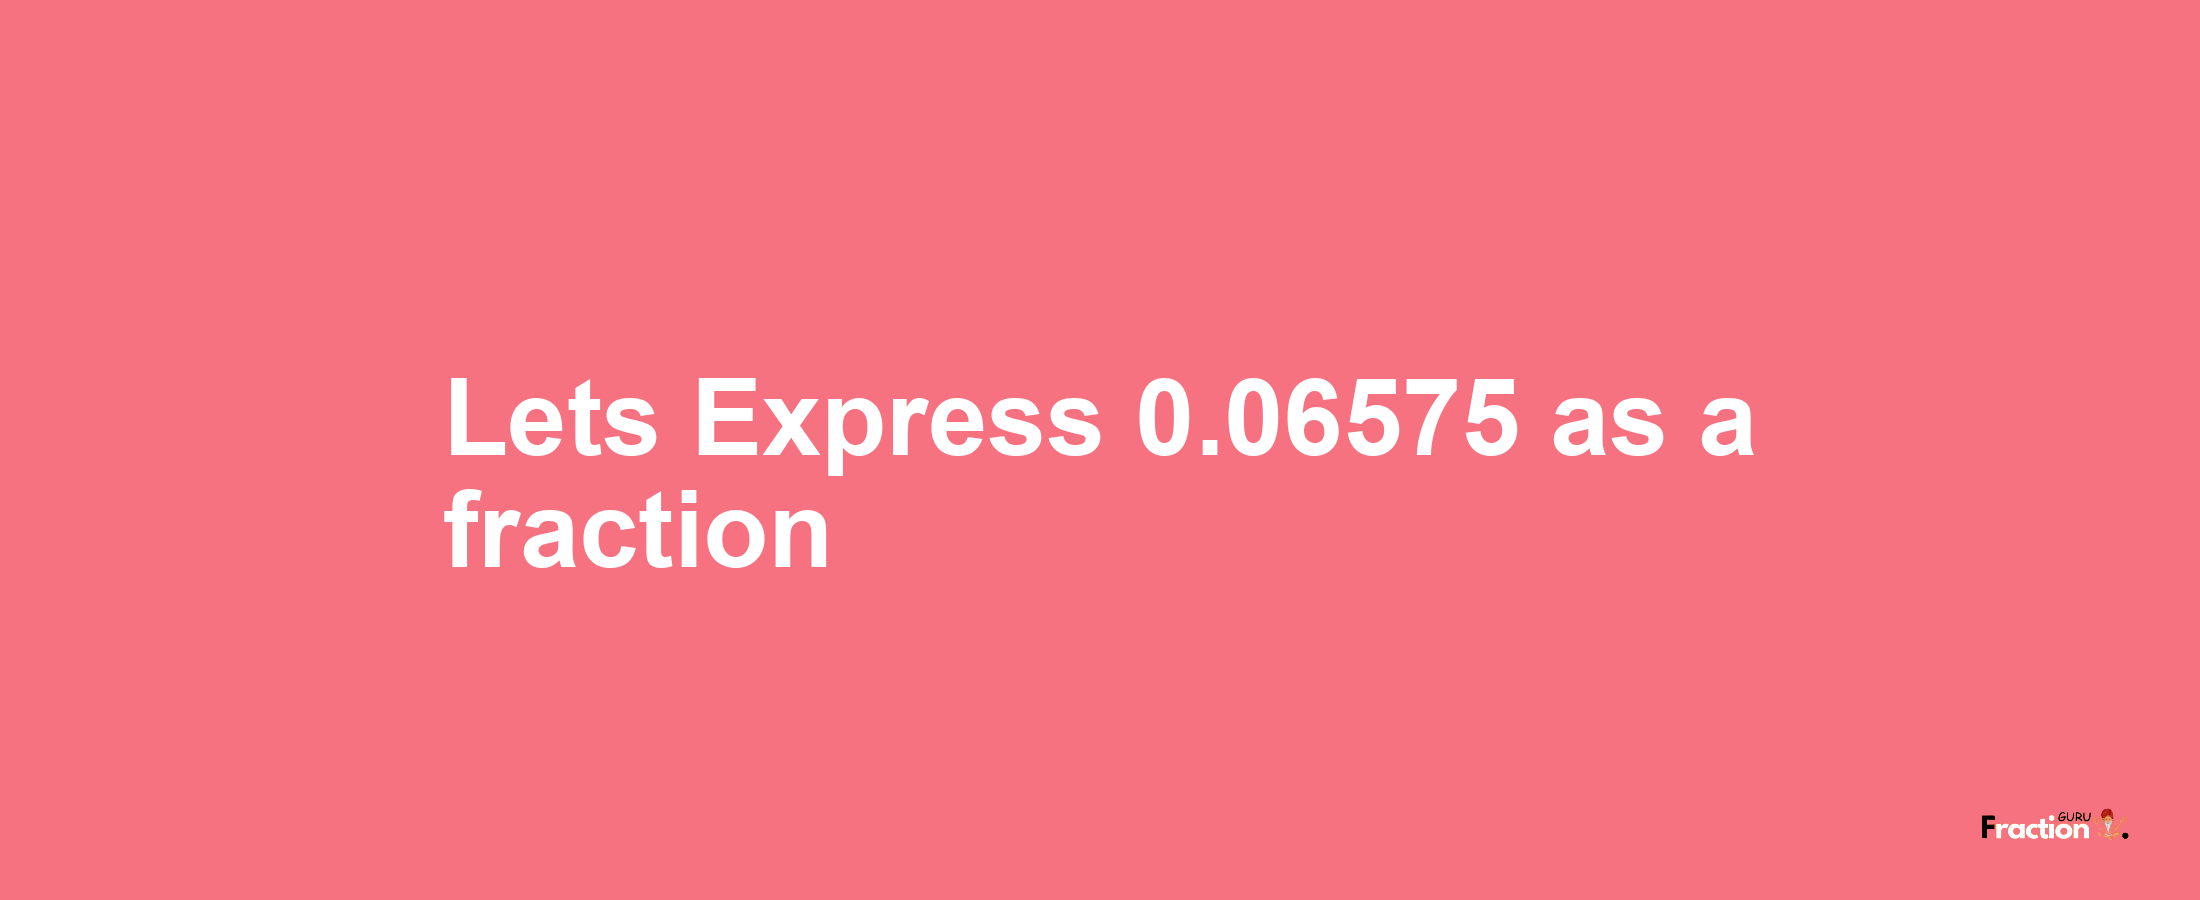 Lets Express 0.06575 as afraction